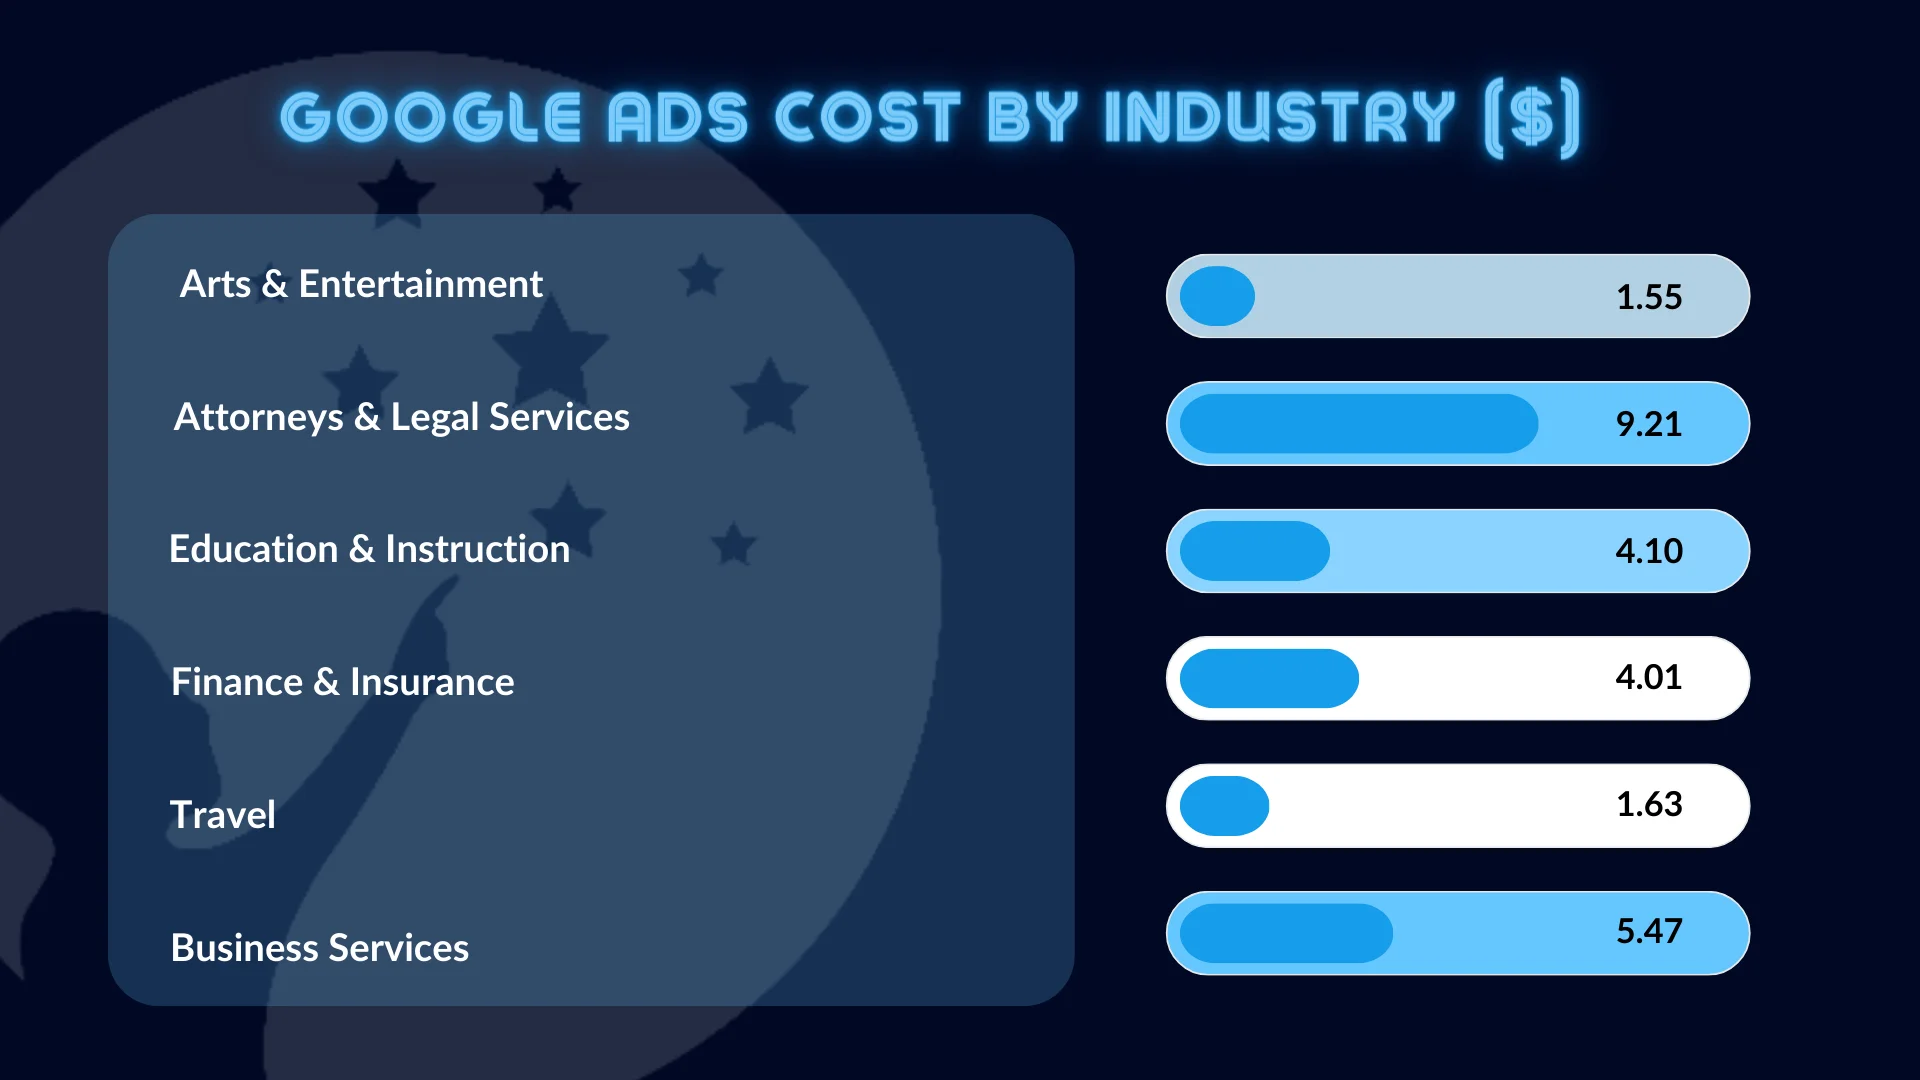 An infographic about Google ads cost by industry